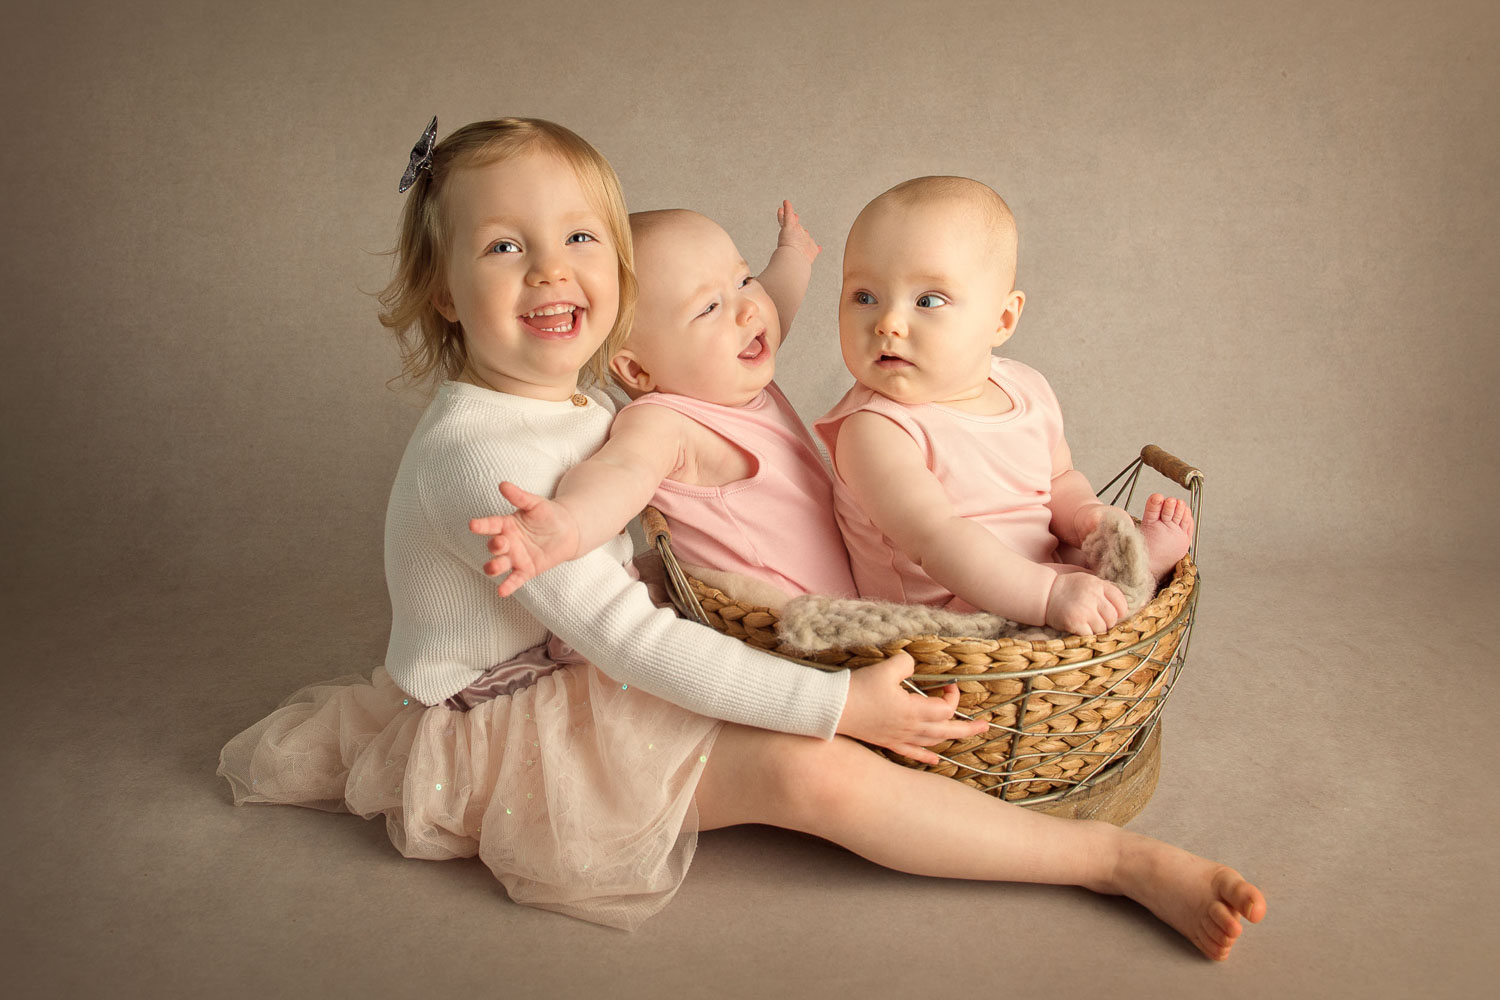 twin babies and older sister by auckland photographer siobhan kelly photography